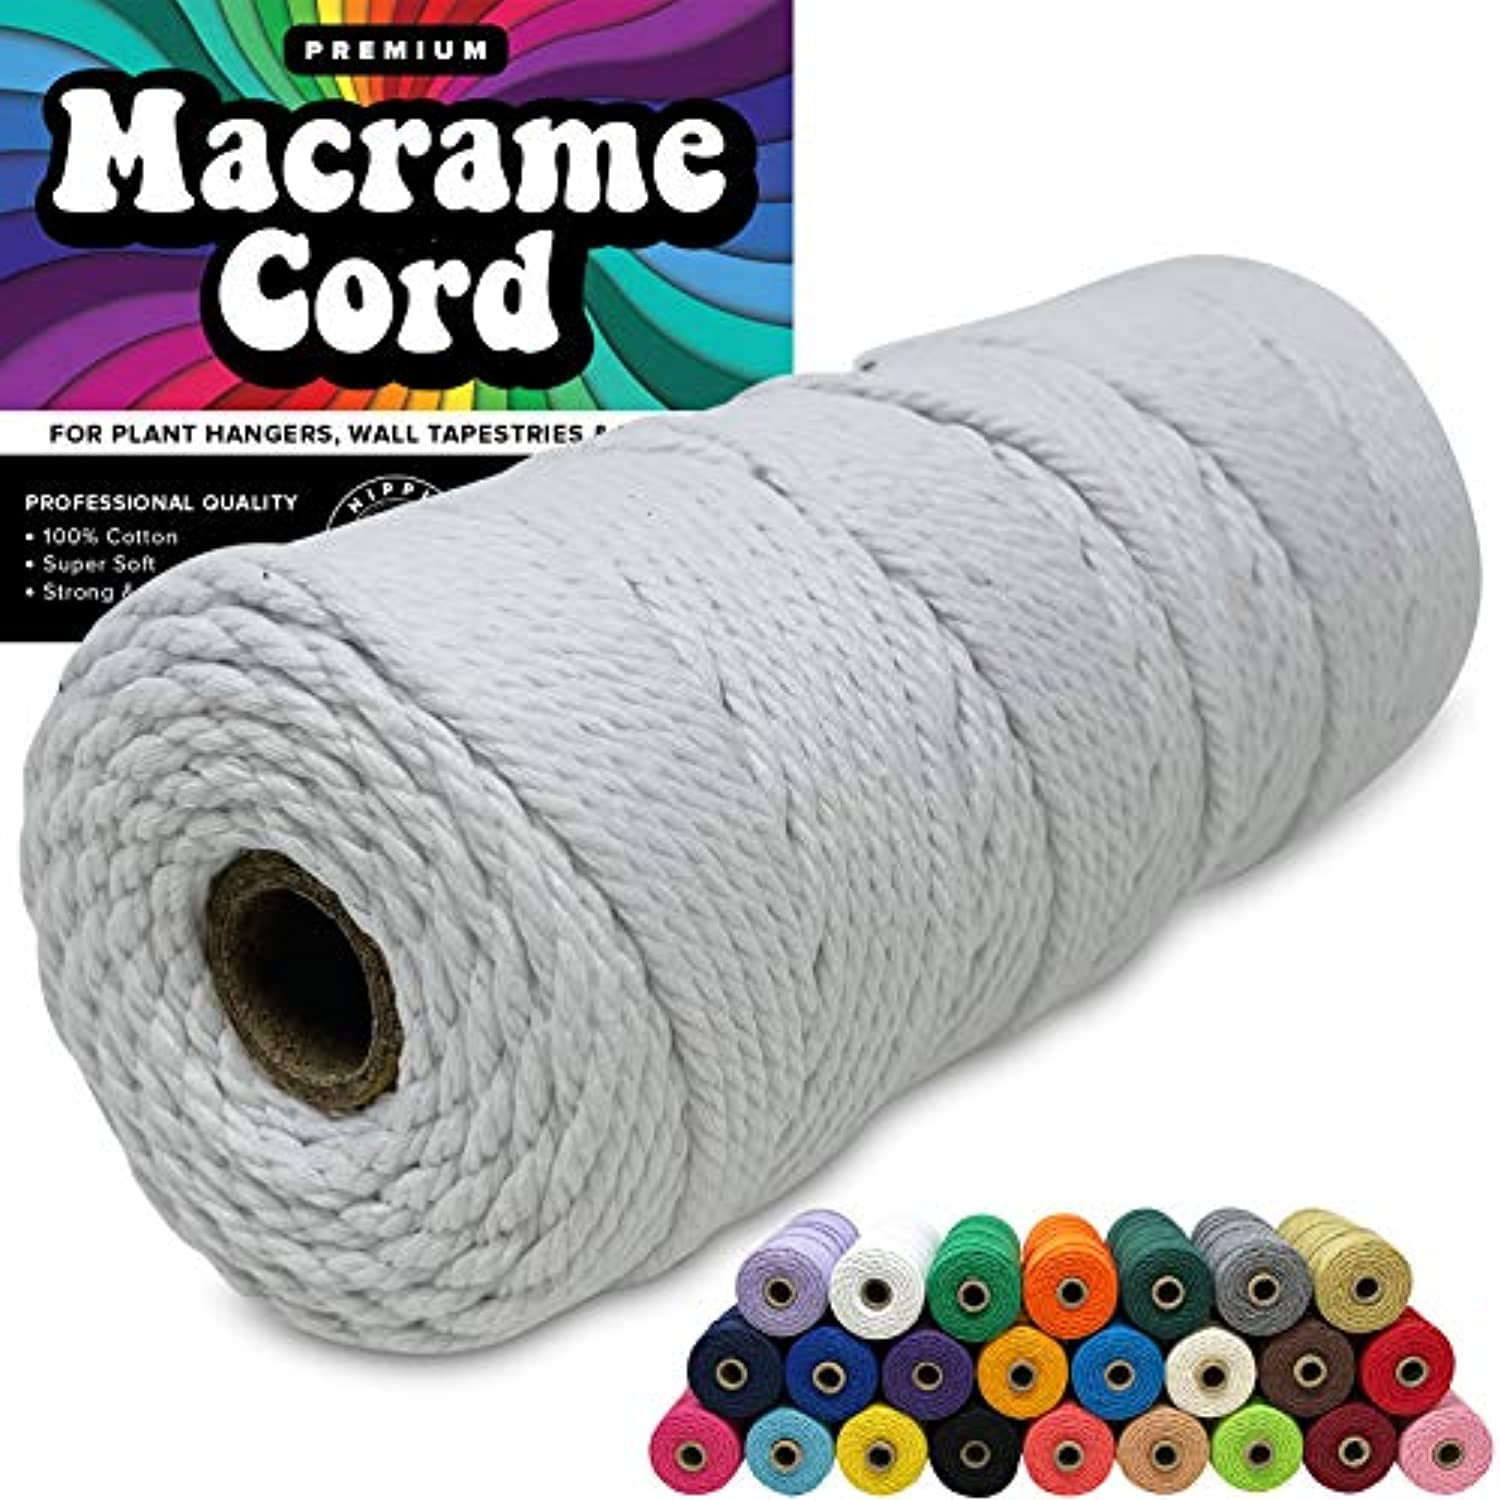 3mm Macrame Cord 3mm Thick Cords for Macrame Yarn 100% Cotton Colored  Macrame Rope Cord Natural Craft Cord String Yarn Supplies 325 Feet 3 mm  Cotton